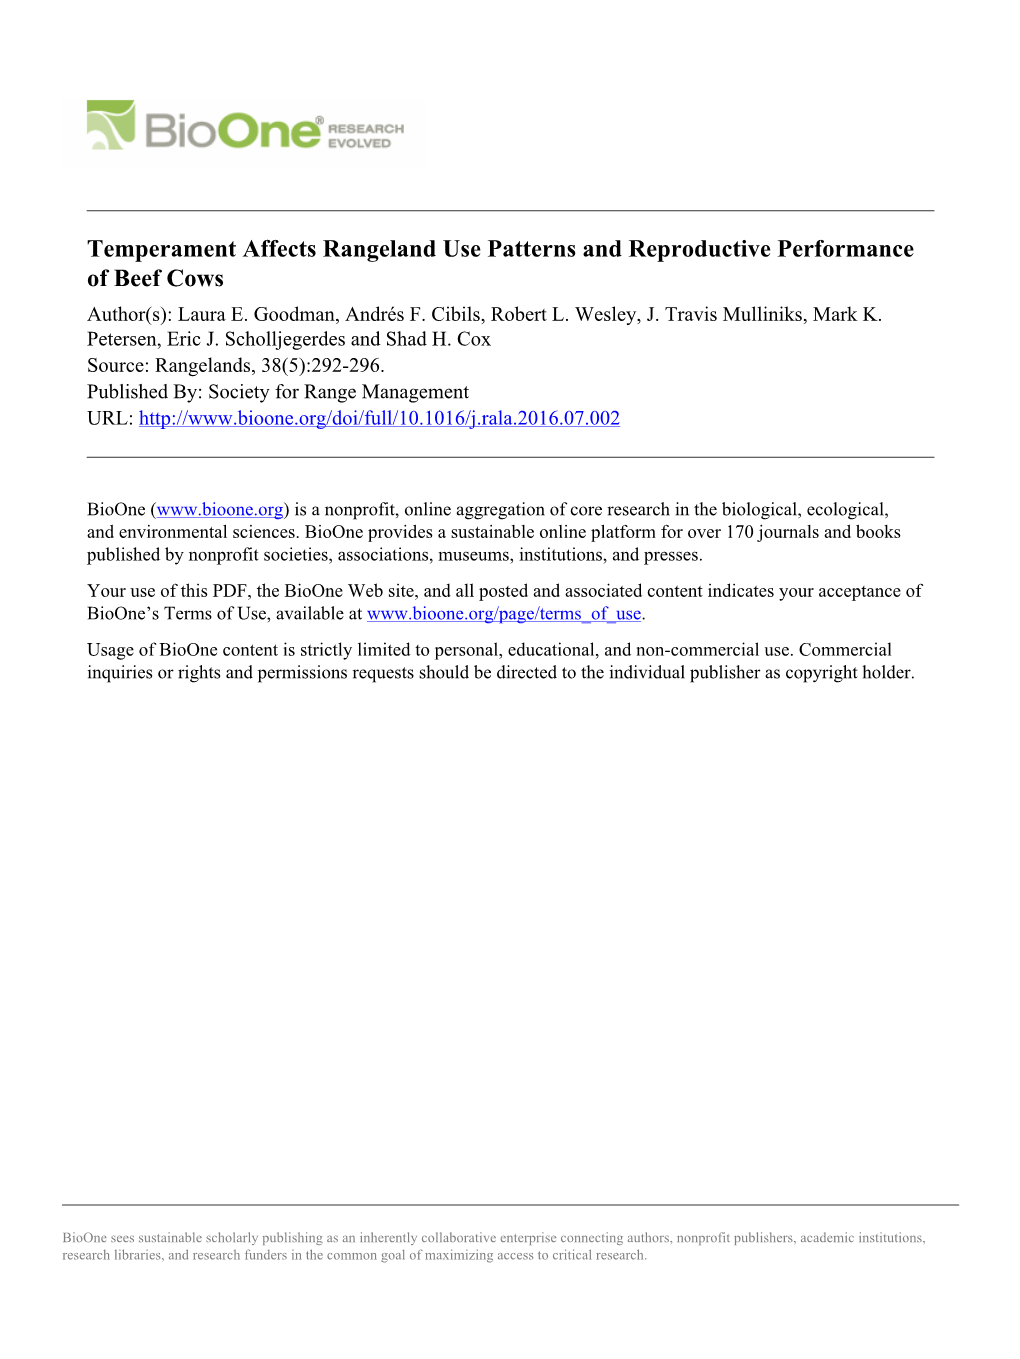 Temperament Affects Rangeland Use Patterns and Reproductive Performance of Beef Cows Author(S): Laura E